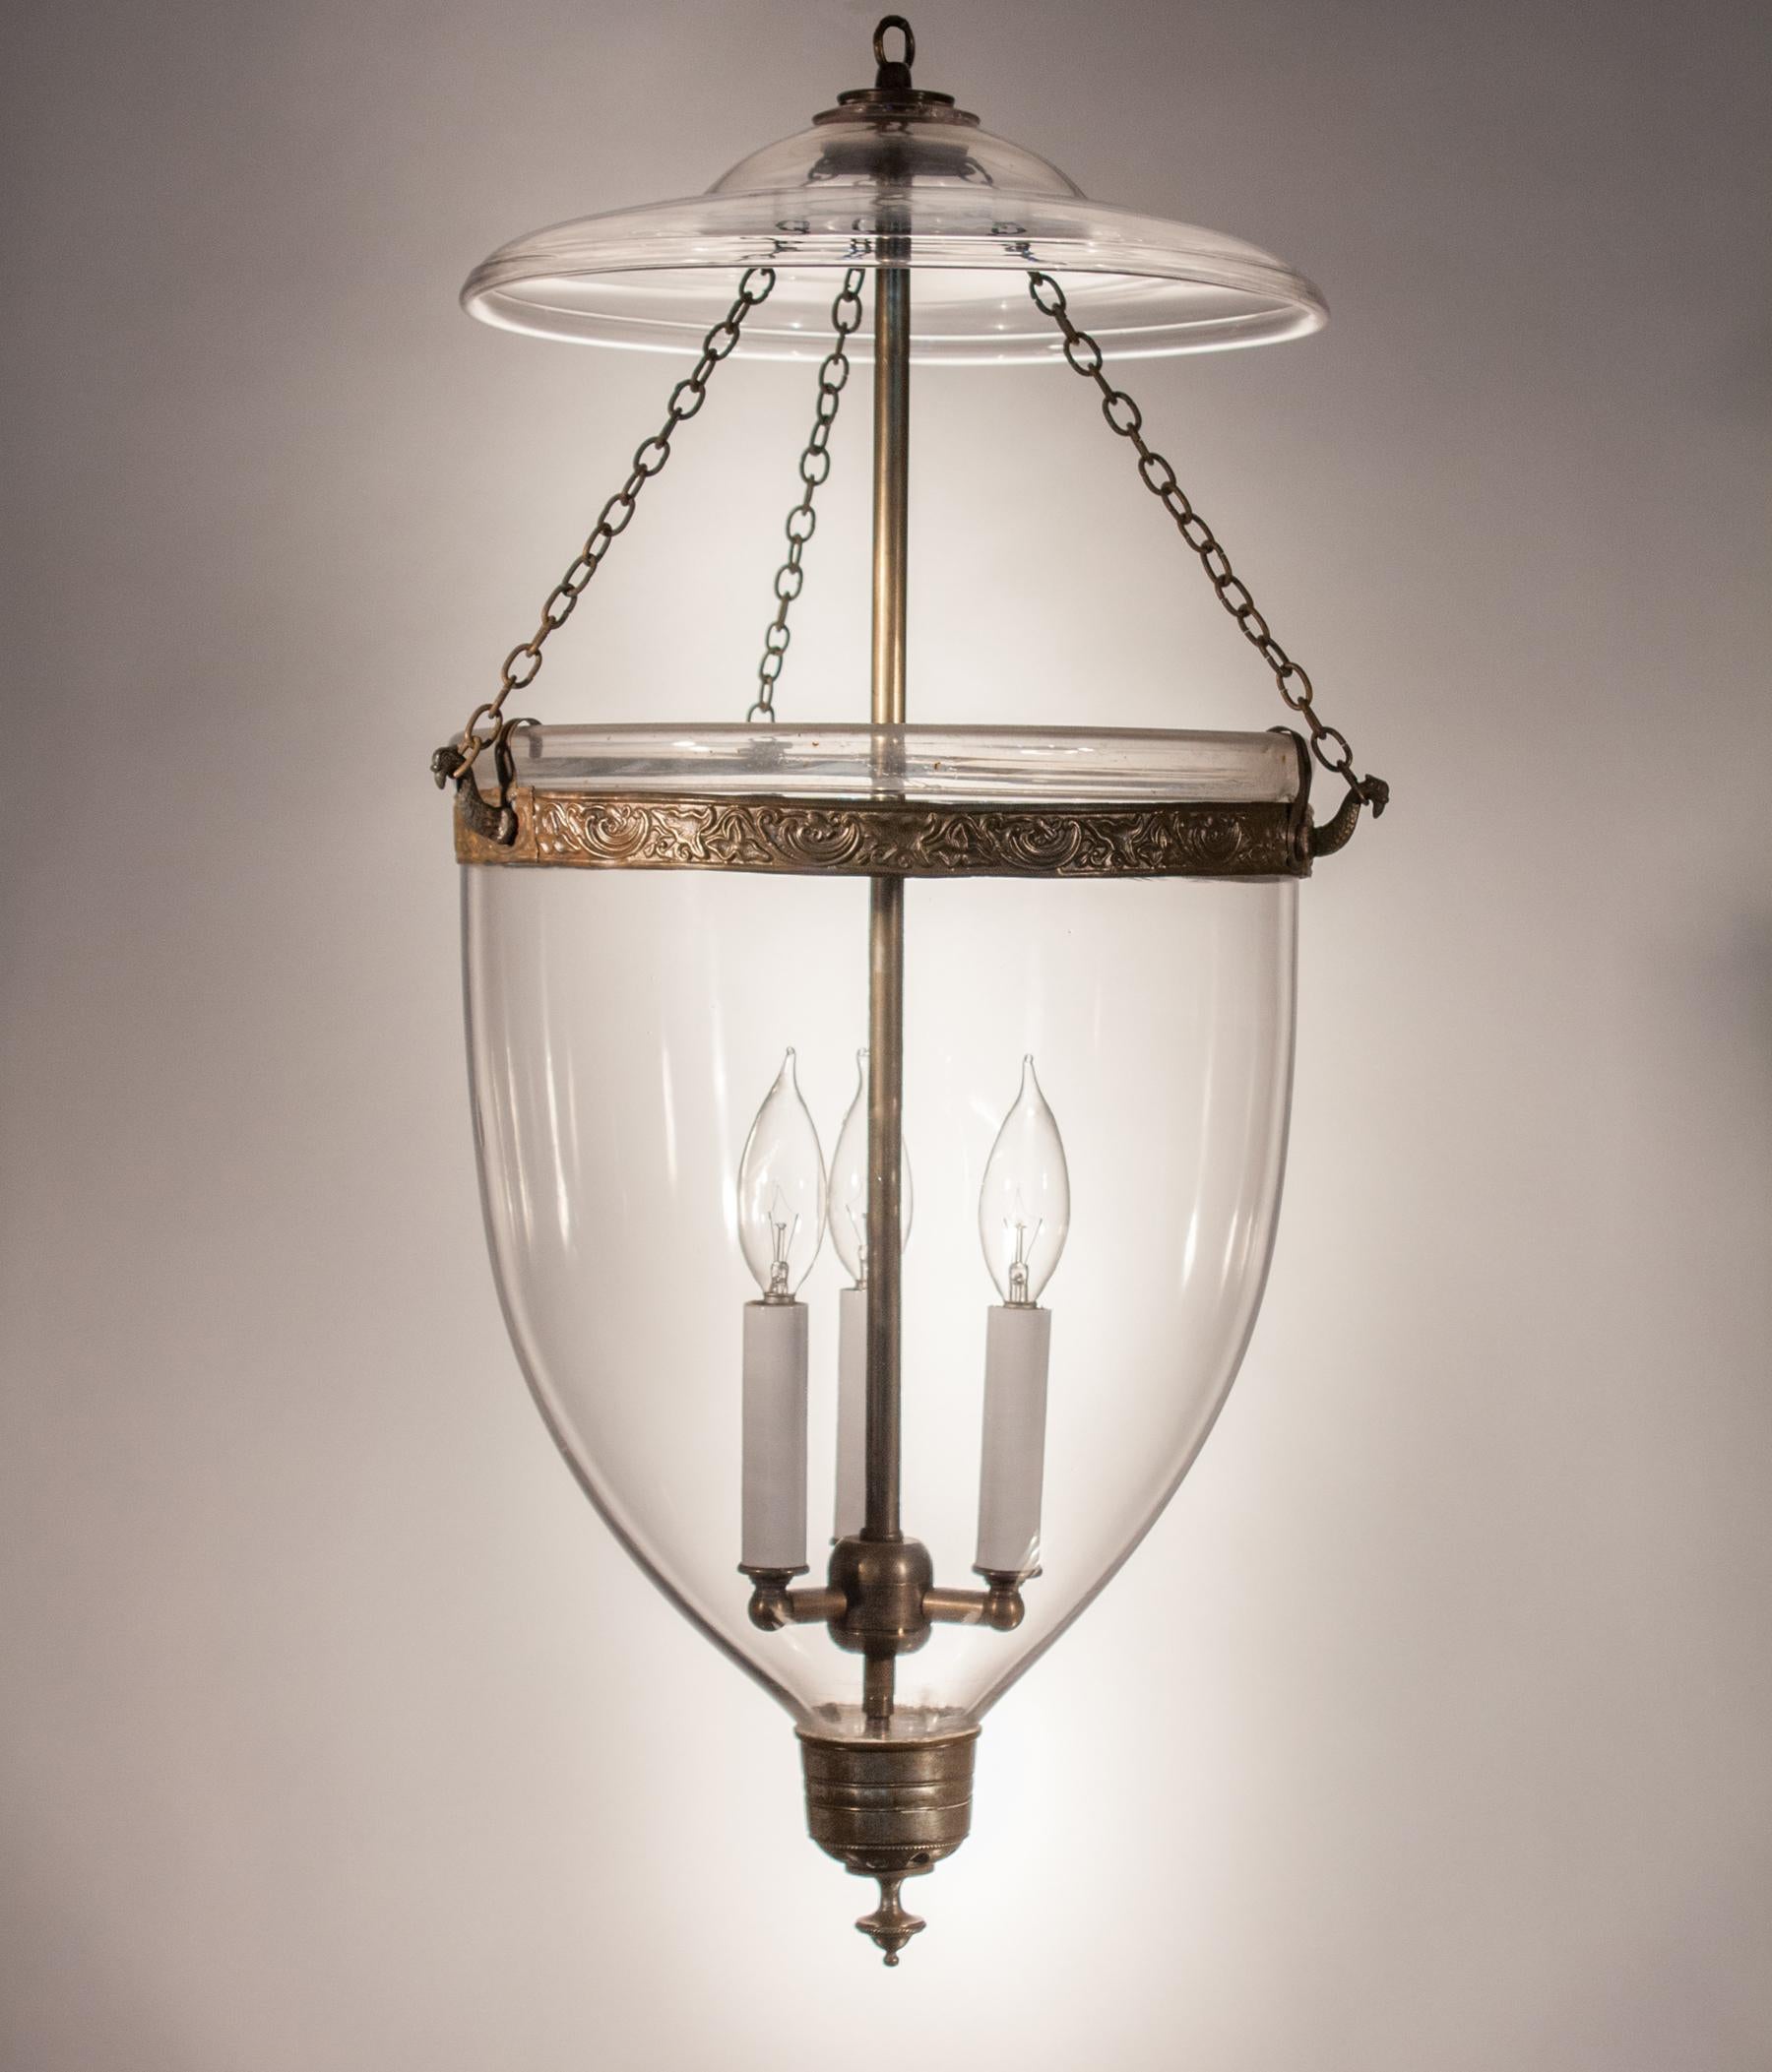 Simple and elegant, this larger-sized handblown clear glass bell jar lantern has a very pleasing form. The embossed brass band (which has been replaced for safety) and silver-toned finial add the perfect adornment to this pendant. The light has been